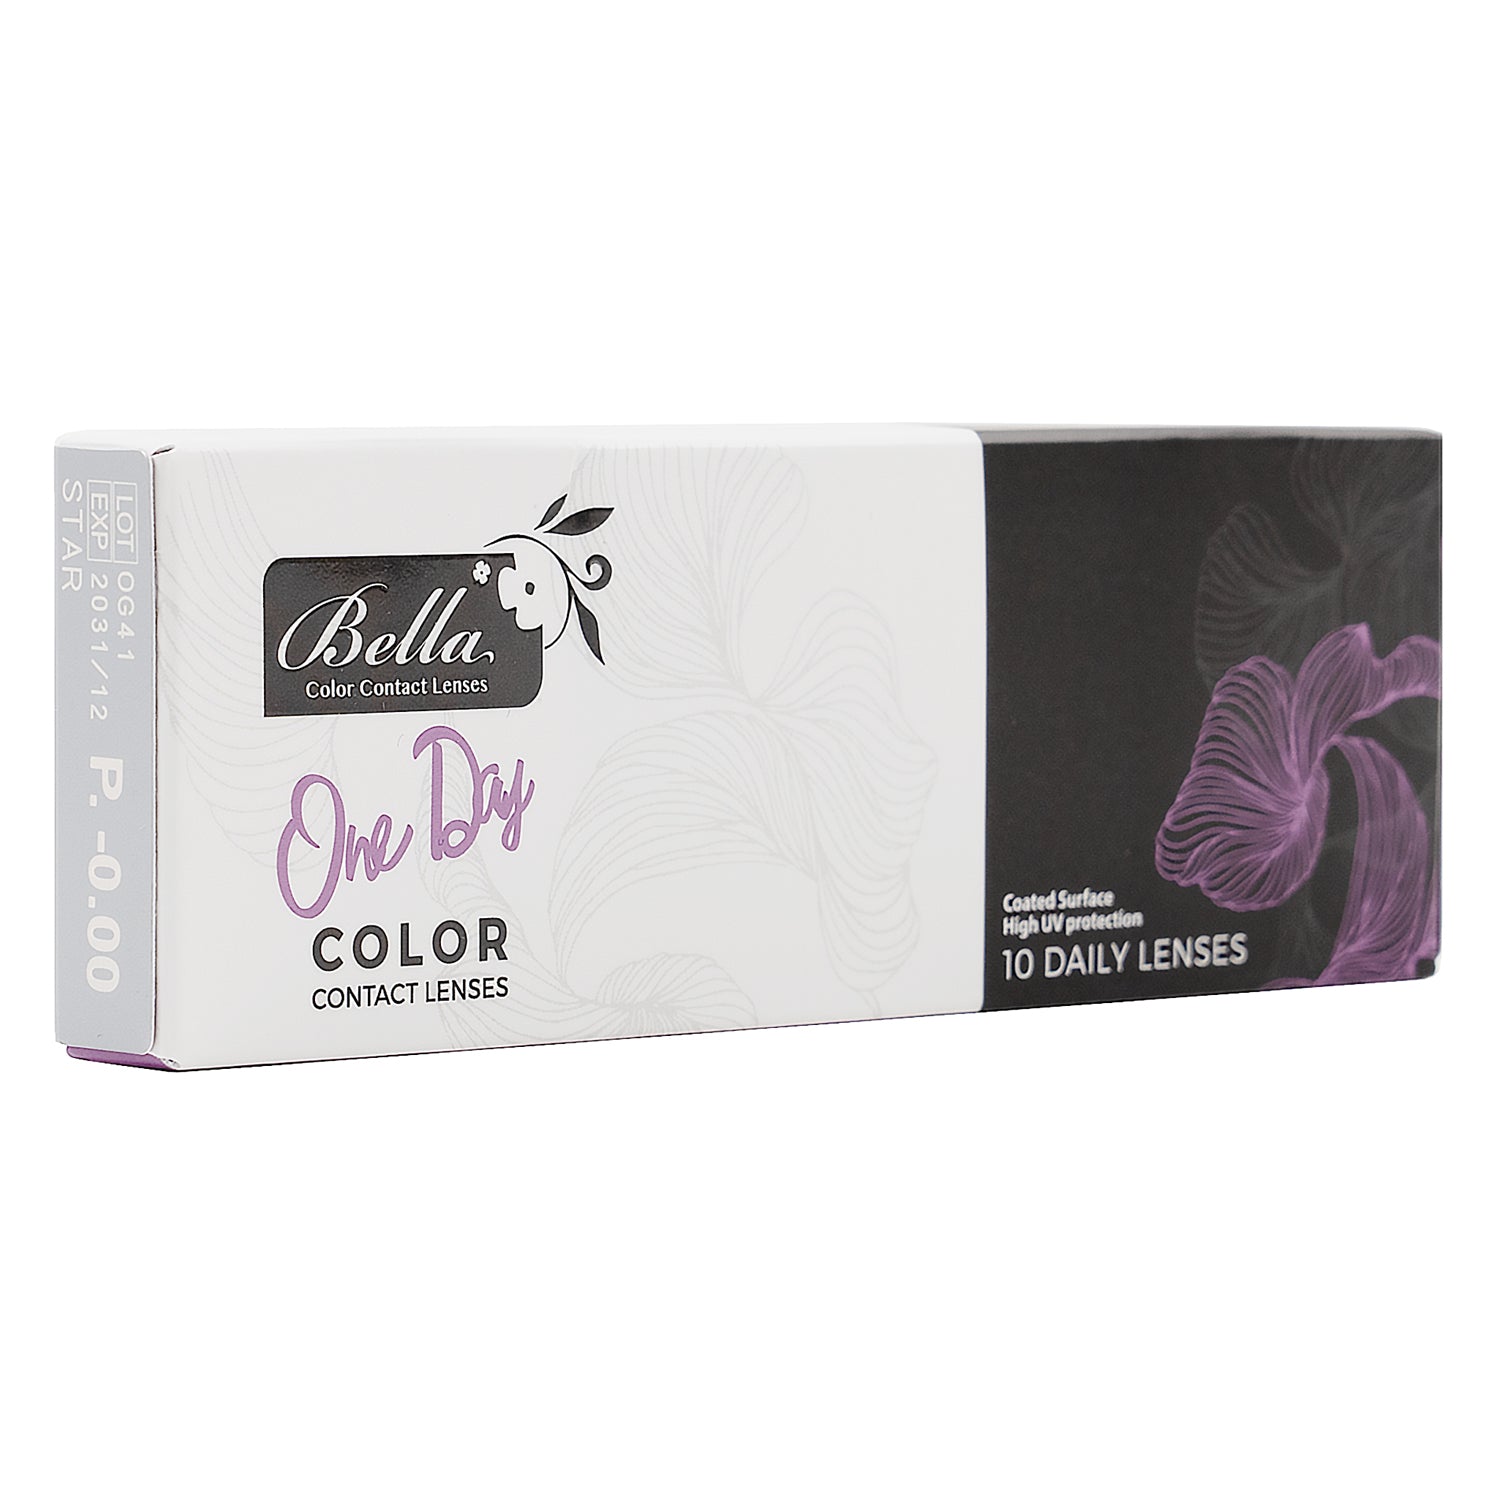 Bella Dye One Day Color Contact Lenses - Star